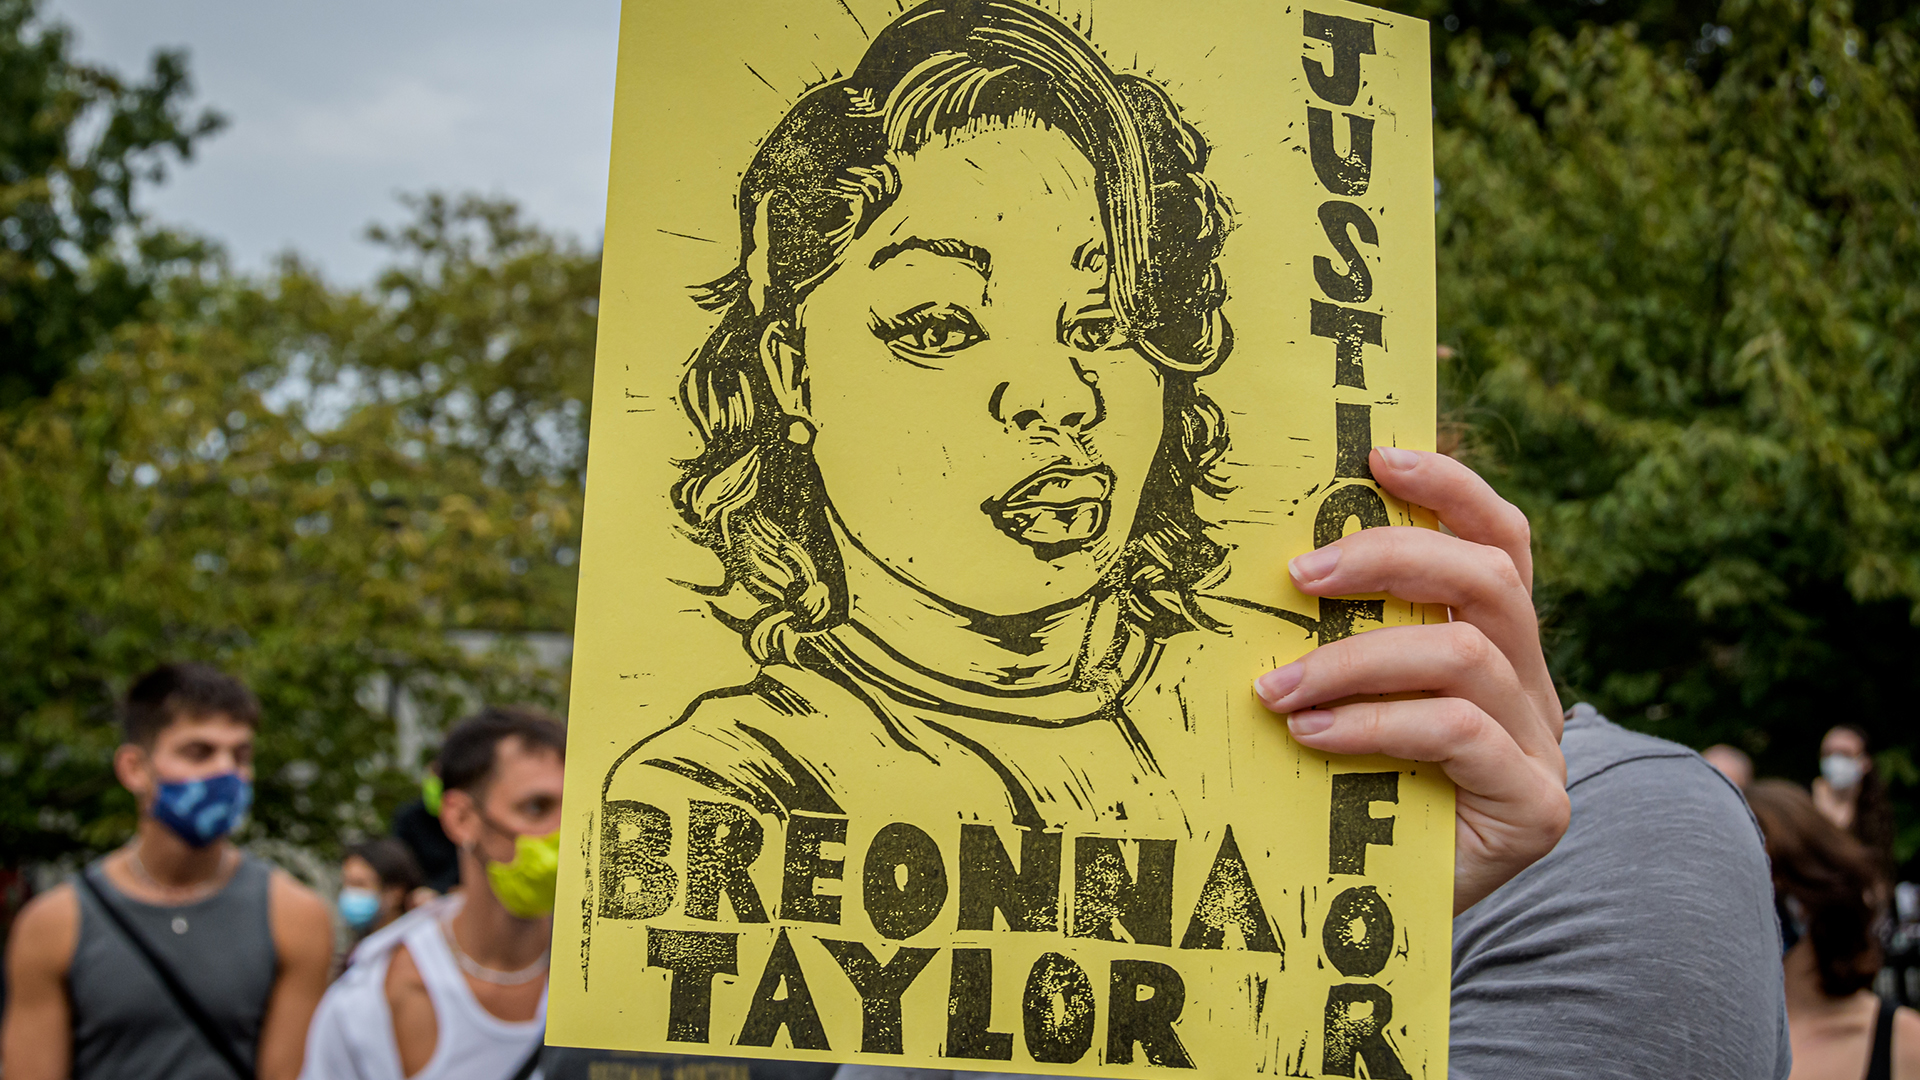 Georgia High School Teacher Faces Backlash for Saying Breonna Taylor’s Death Was Her Own Fault